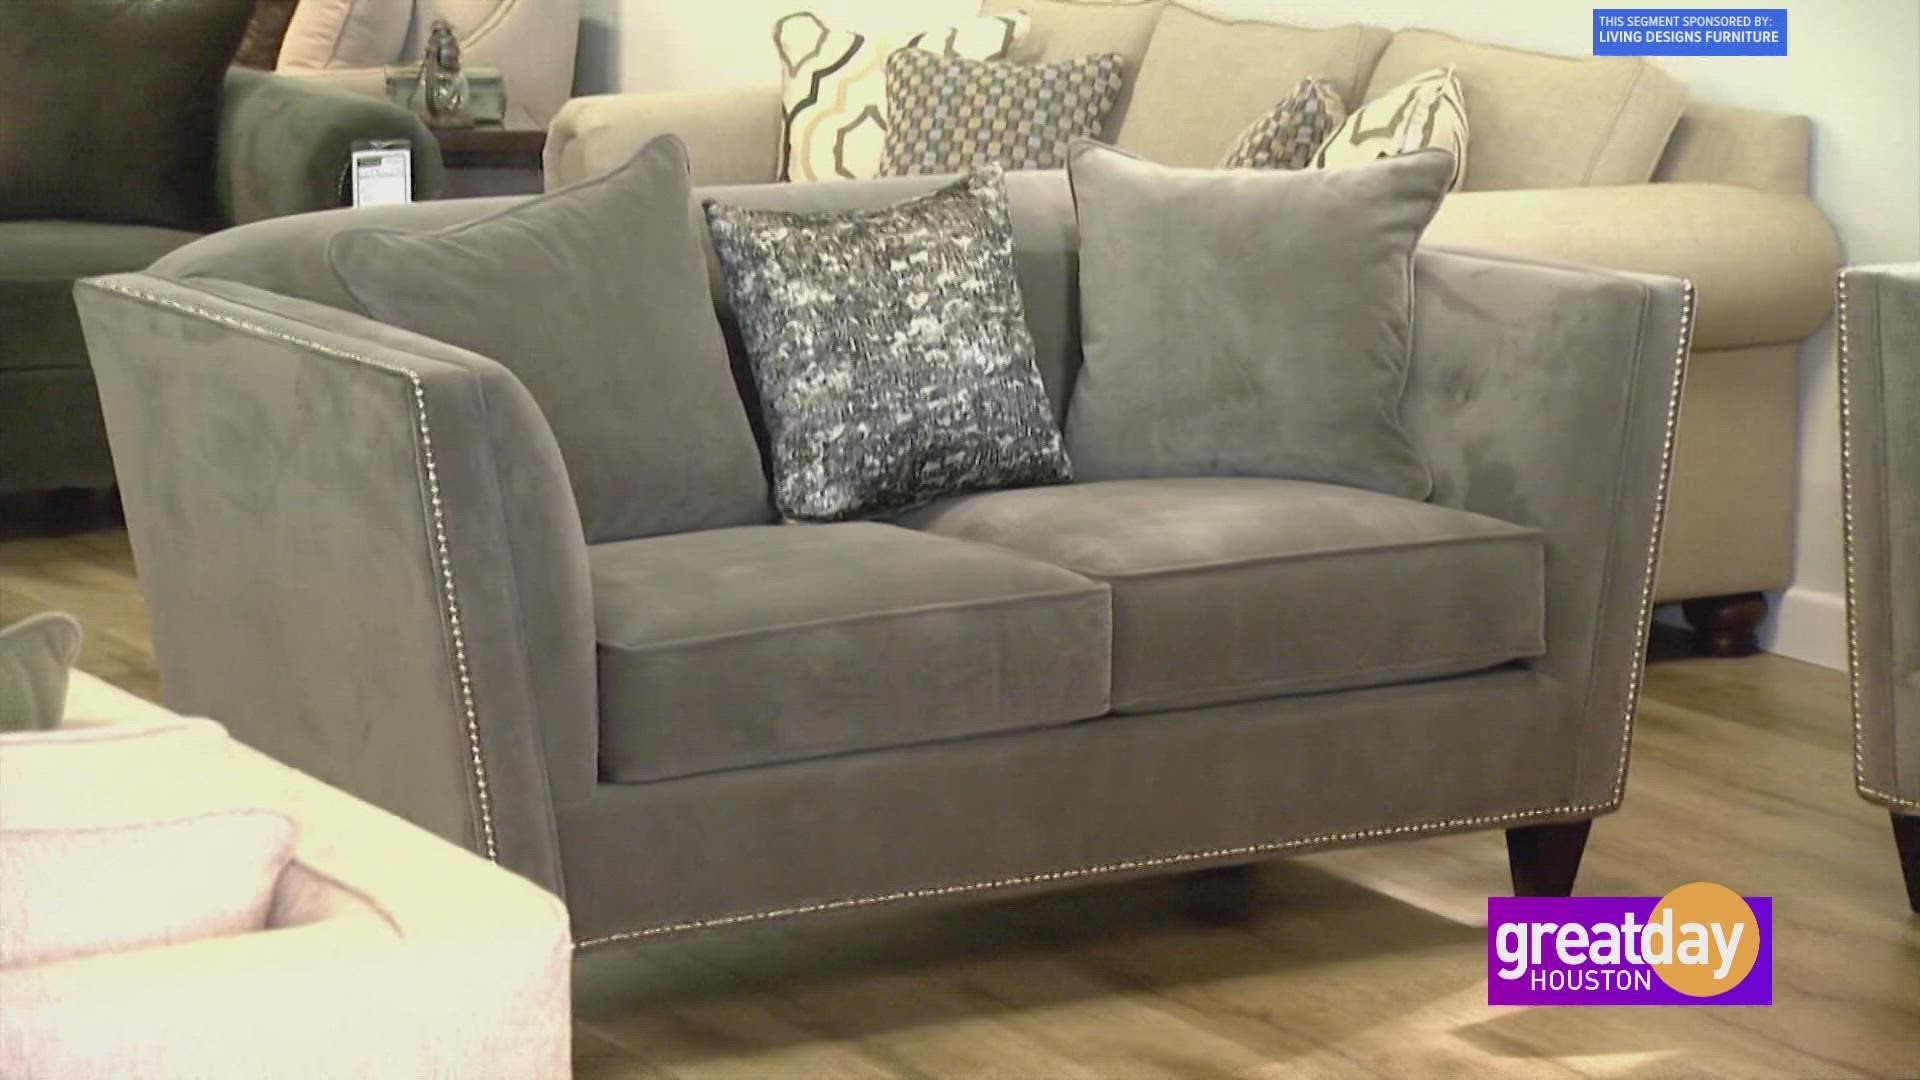 At Living Designs Furniture, they hand-make furniture to fit your space at a price you can afford because they make it here in Houston.